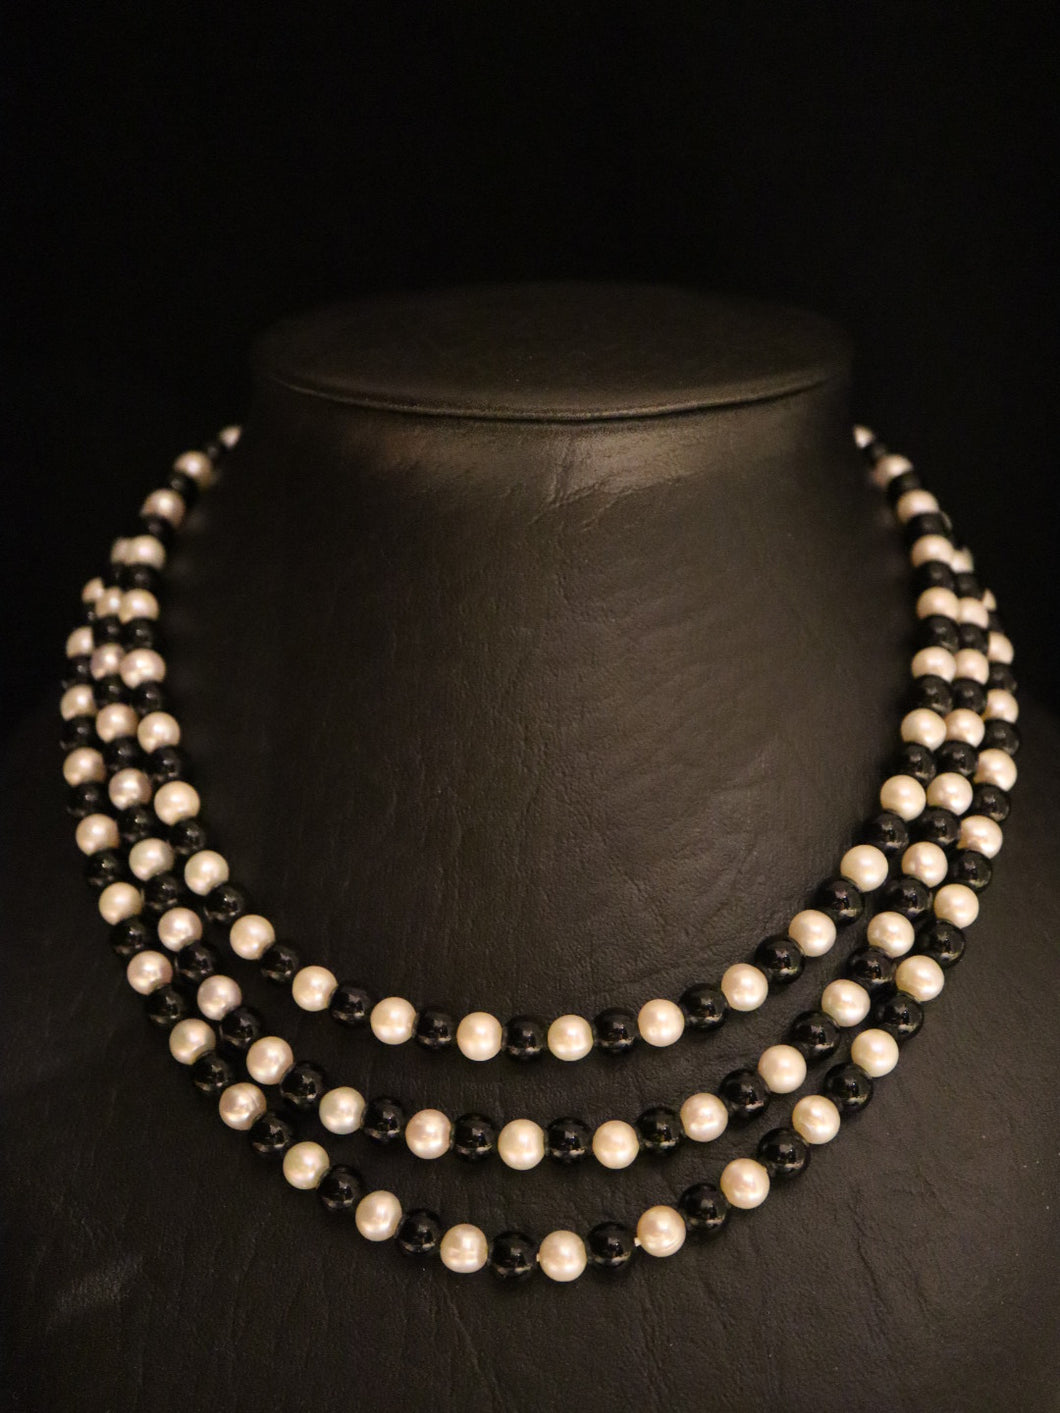 NECKLACE . TRIPLE STRAND PEARL AND ONYX